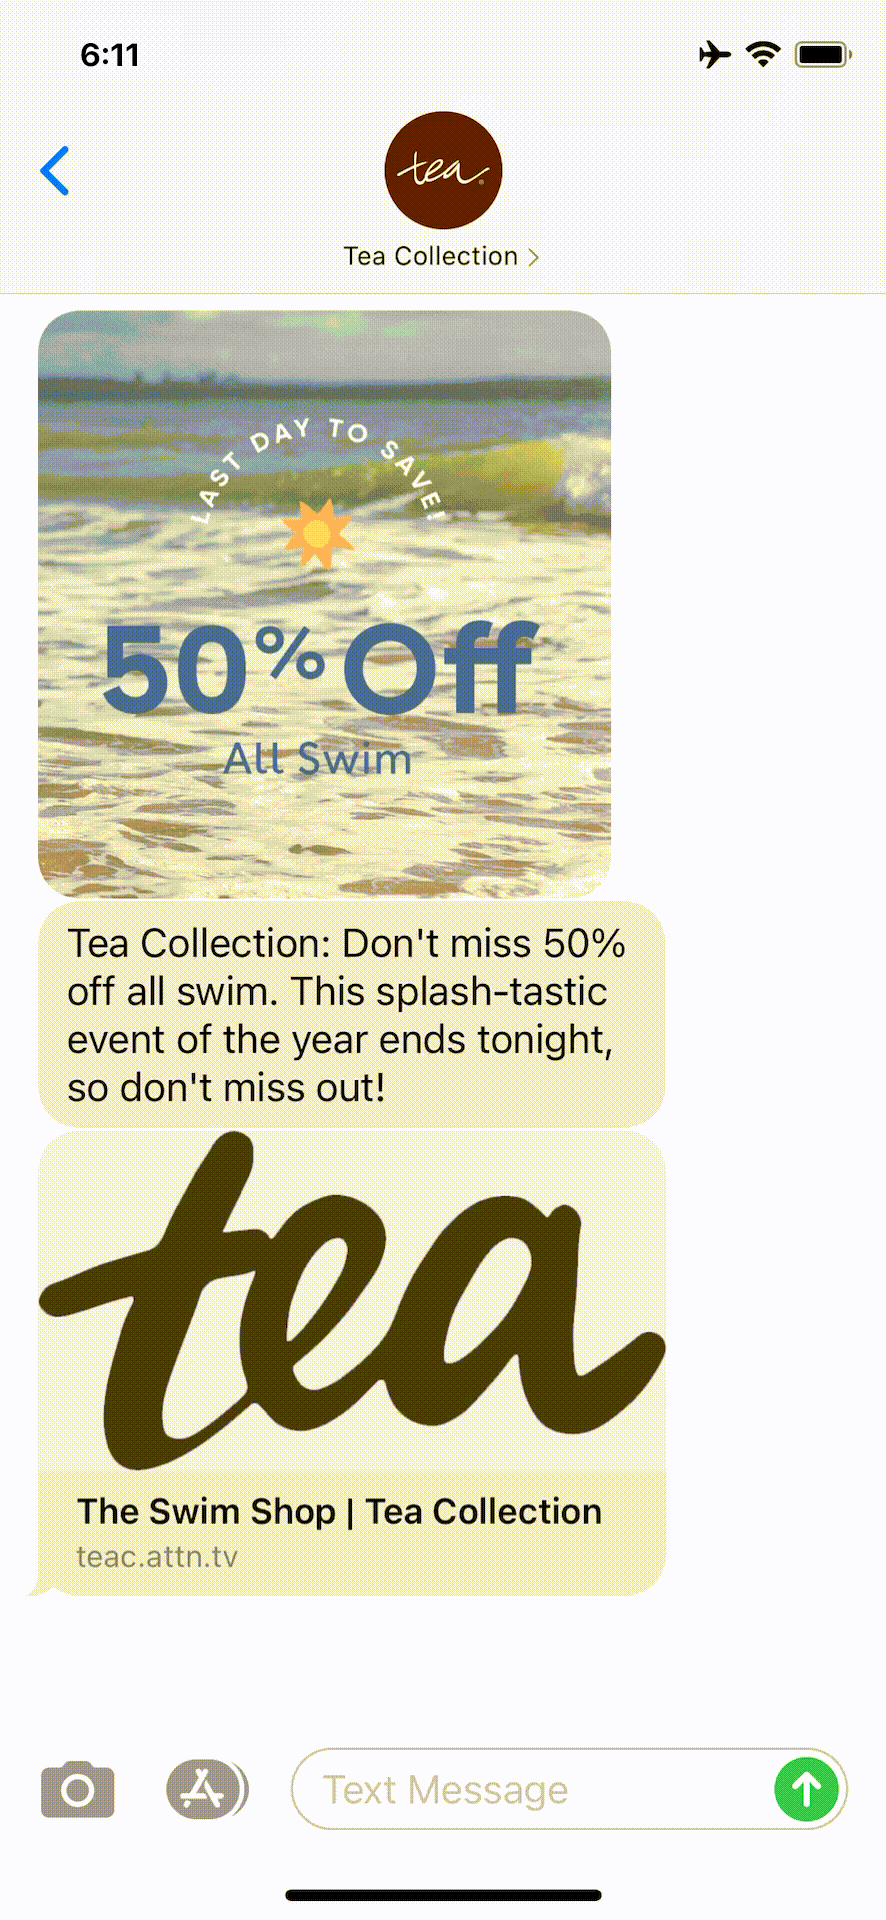 Tea-Collection-Text-Message-Marketing-Example-05.23.2021